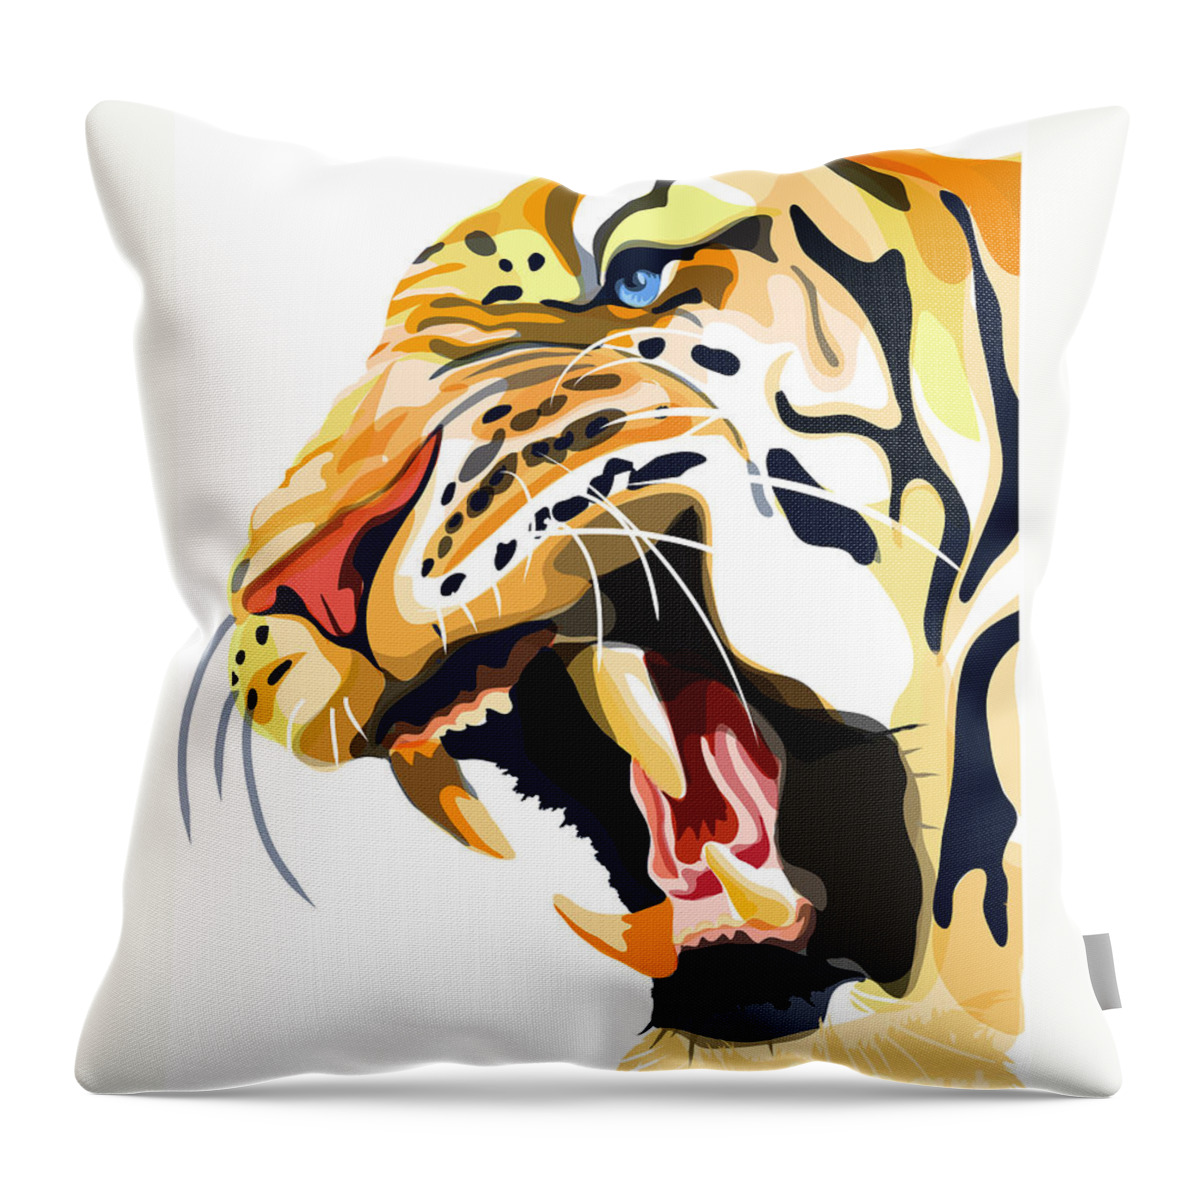 Tiger Illustration Throw Pillow featuring the painting Tiger Roar by Sassan Filsoof